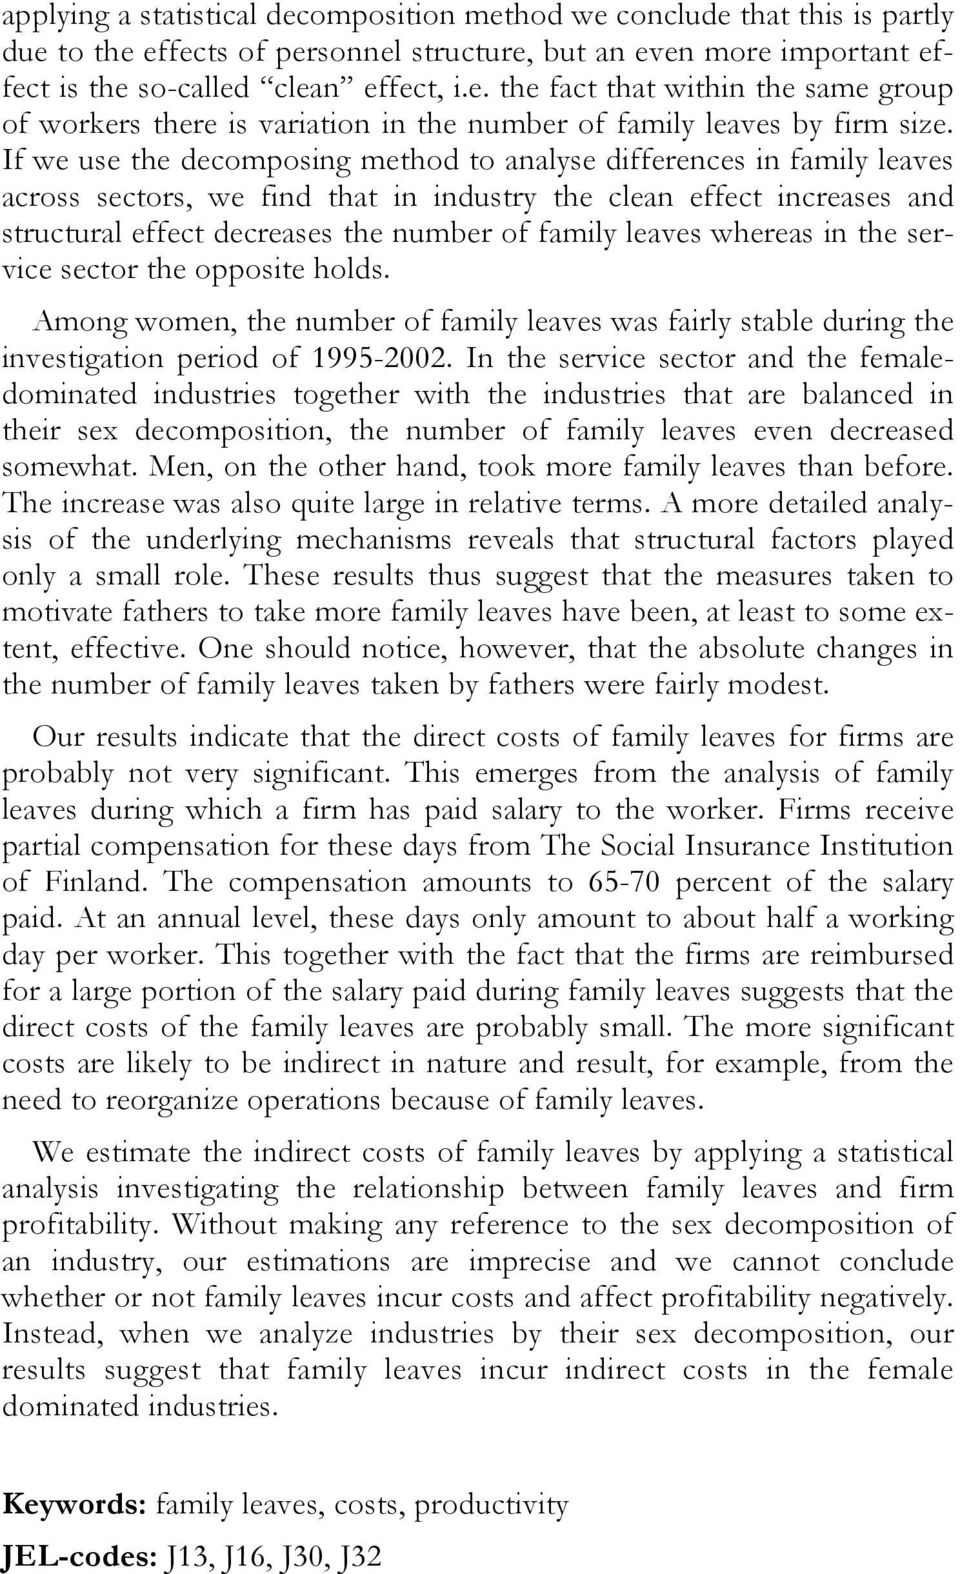 leaves whereas in the service sector the opposite holds. Among women, the number of family leaves was fairly stable during the investigation period of 199-22.